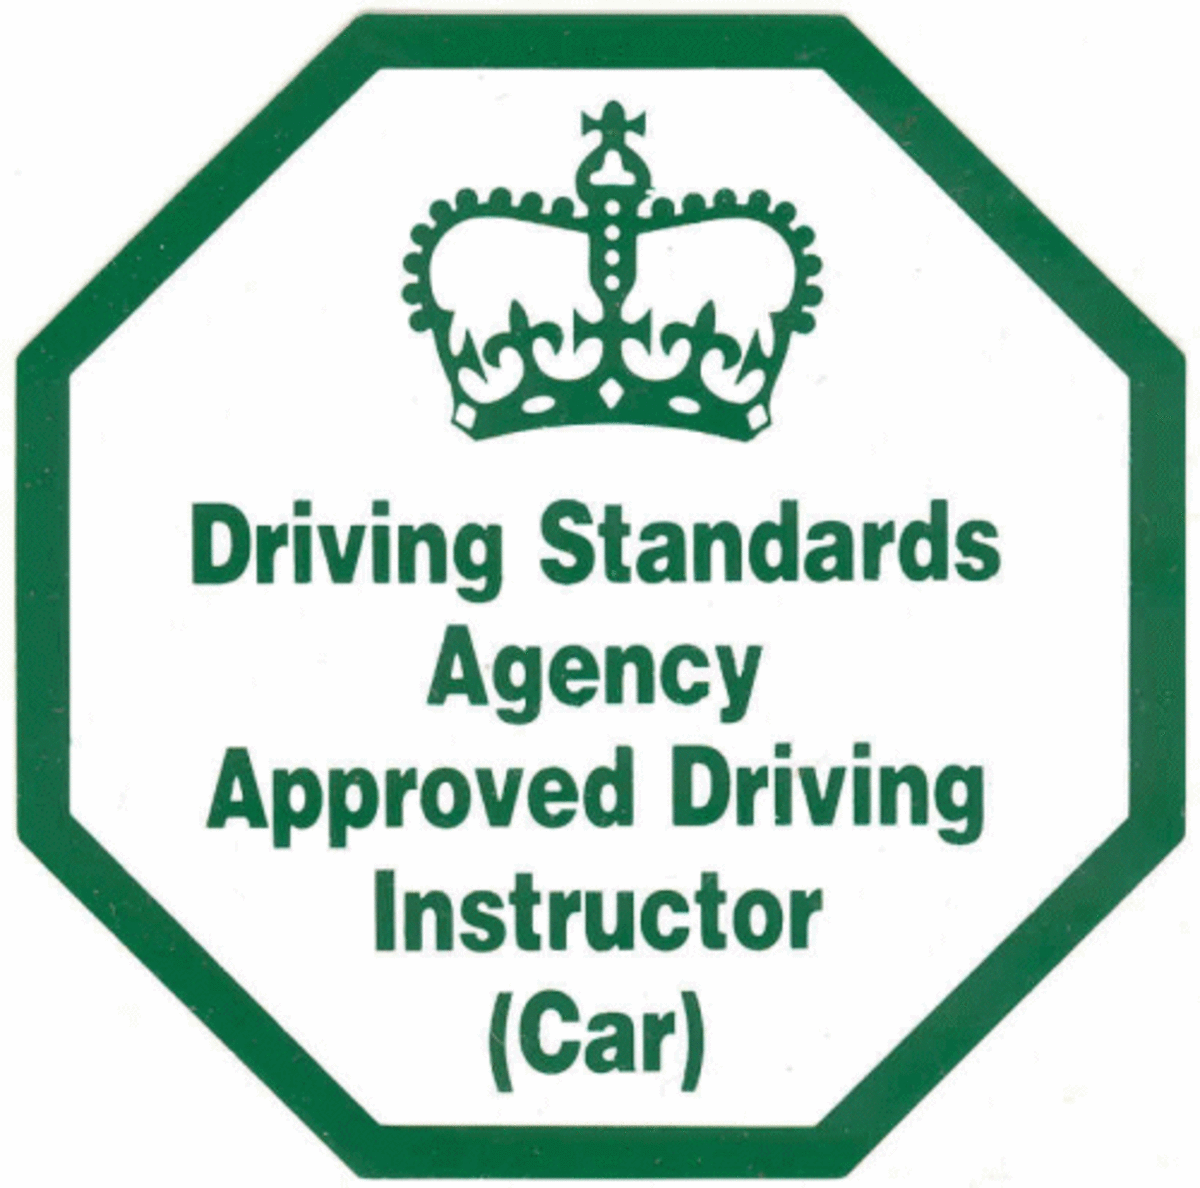 The basic facts about being a driving instructor